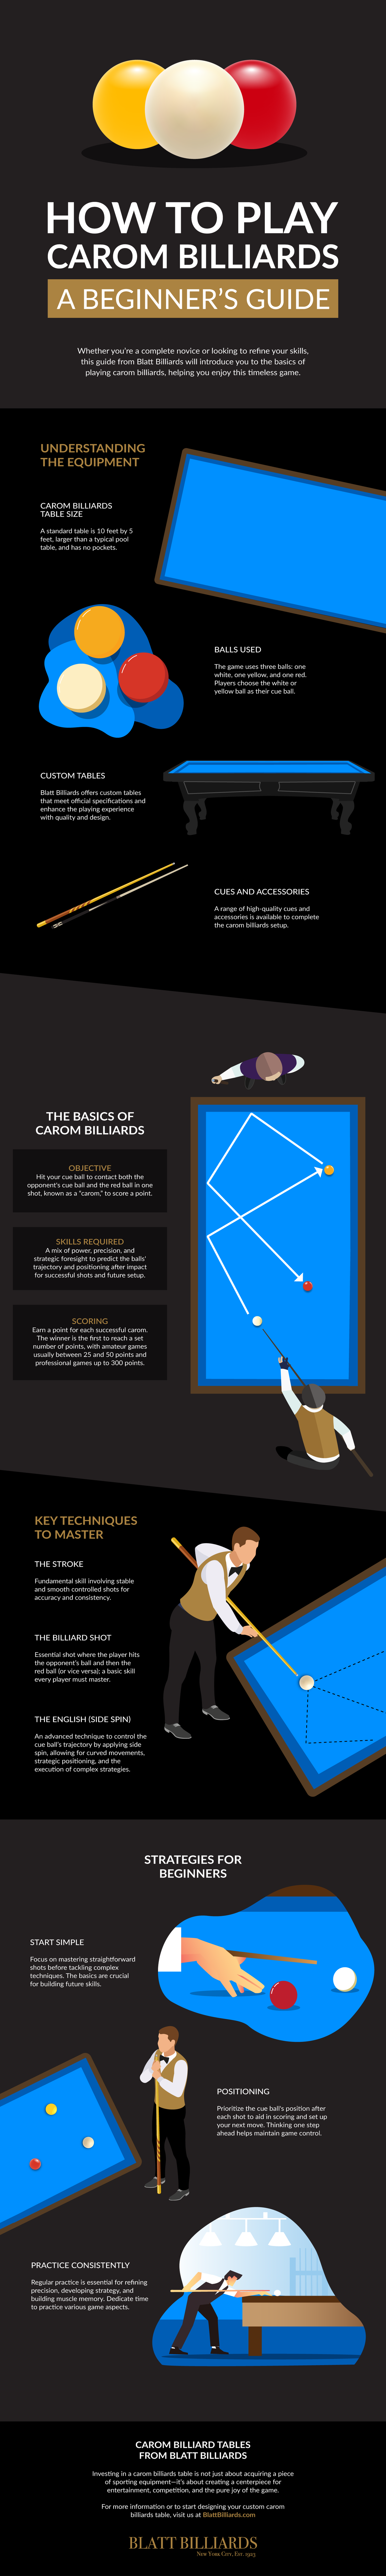 How to Play Carom Billiards: A Beginner’s Guide Infographic